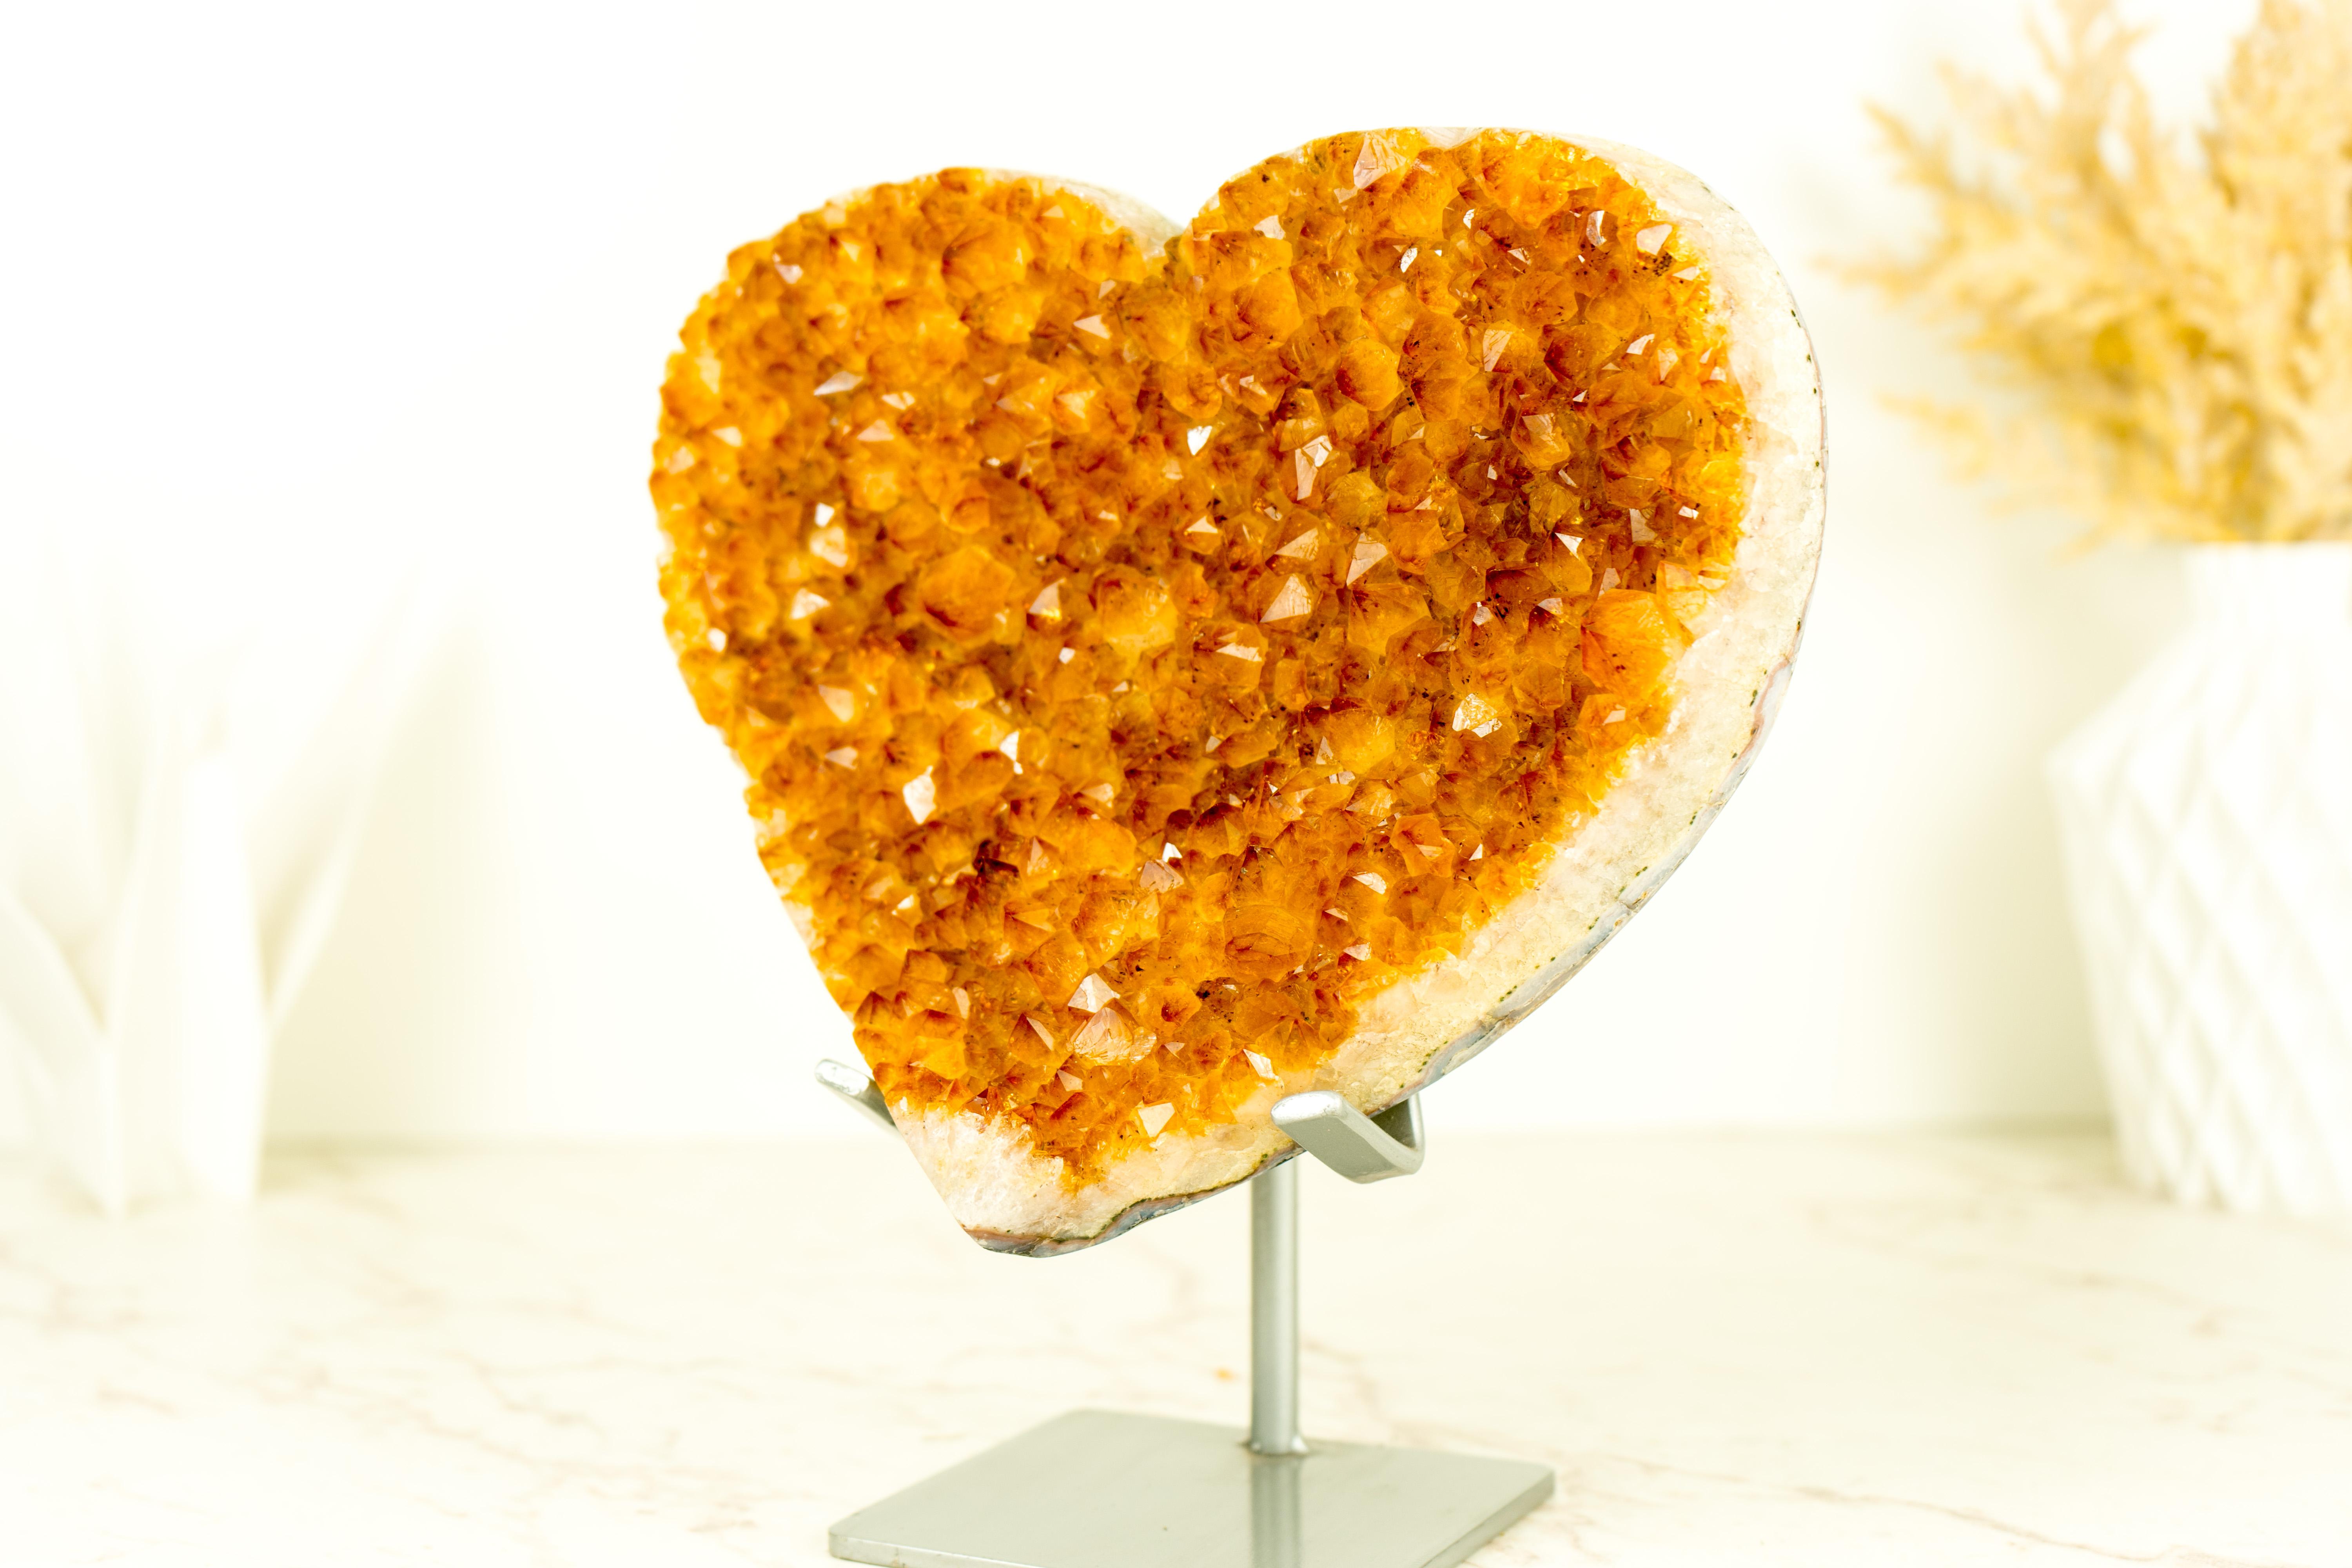 Agate Crystal Citrine Heart Sculpture with Deep Orange, Shiny High-Grade Citrine Druzy For Sale